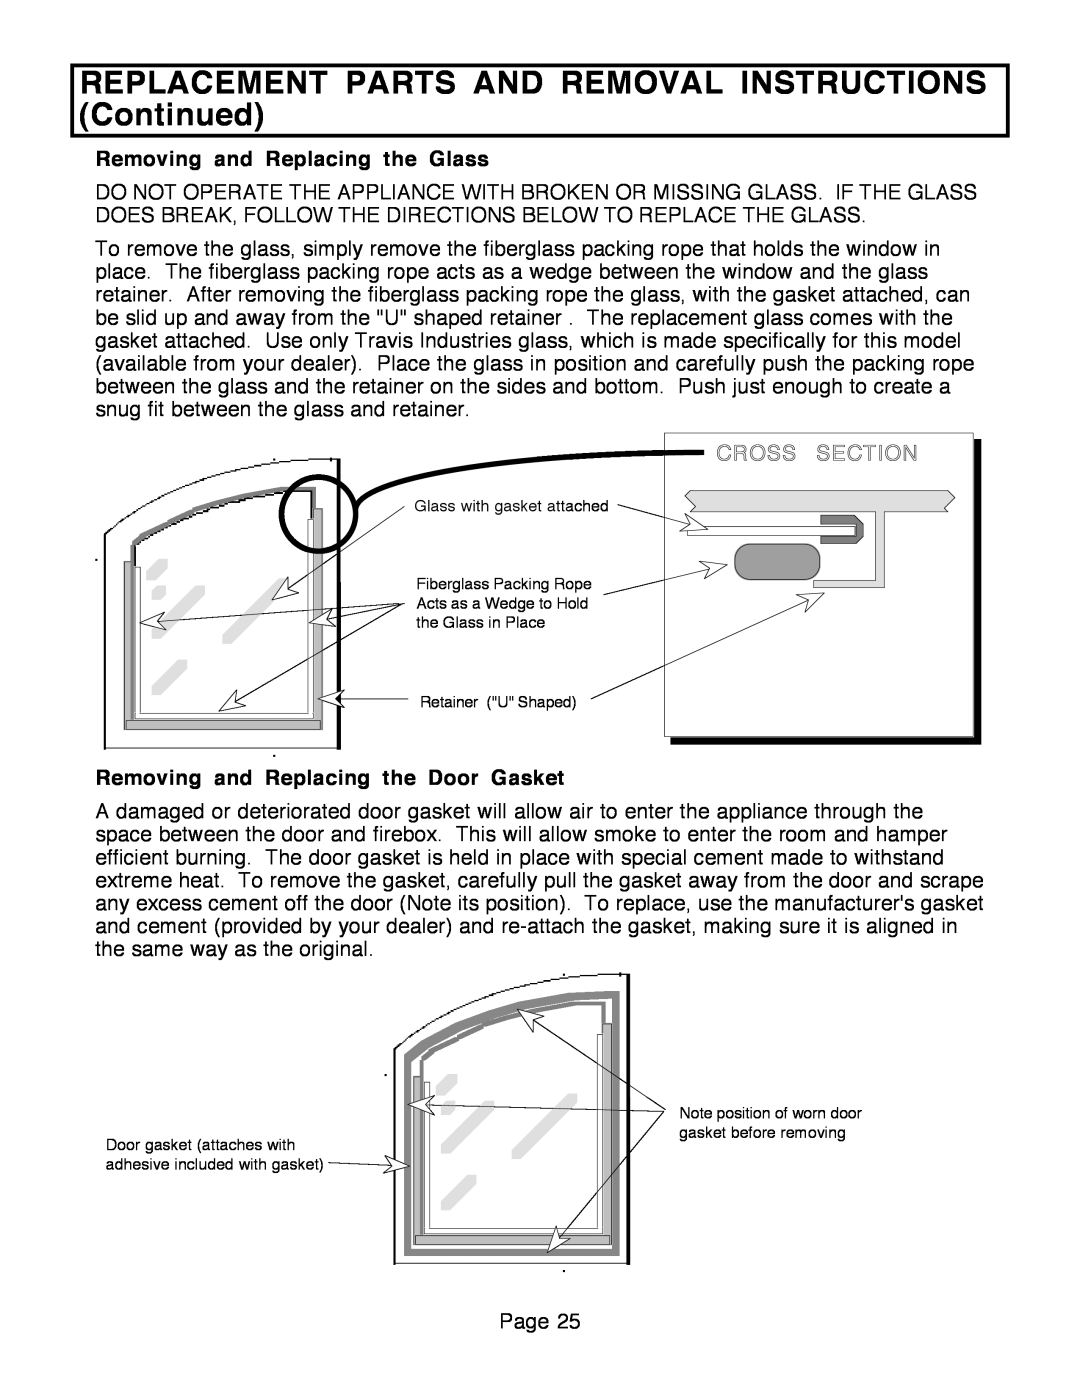 FireplaceXtrordinair 36A-ZC manual Removing and Replacing the Glass, Cross Section, Removing and Replacing the Door Gasket 